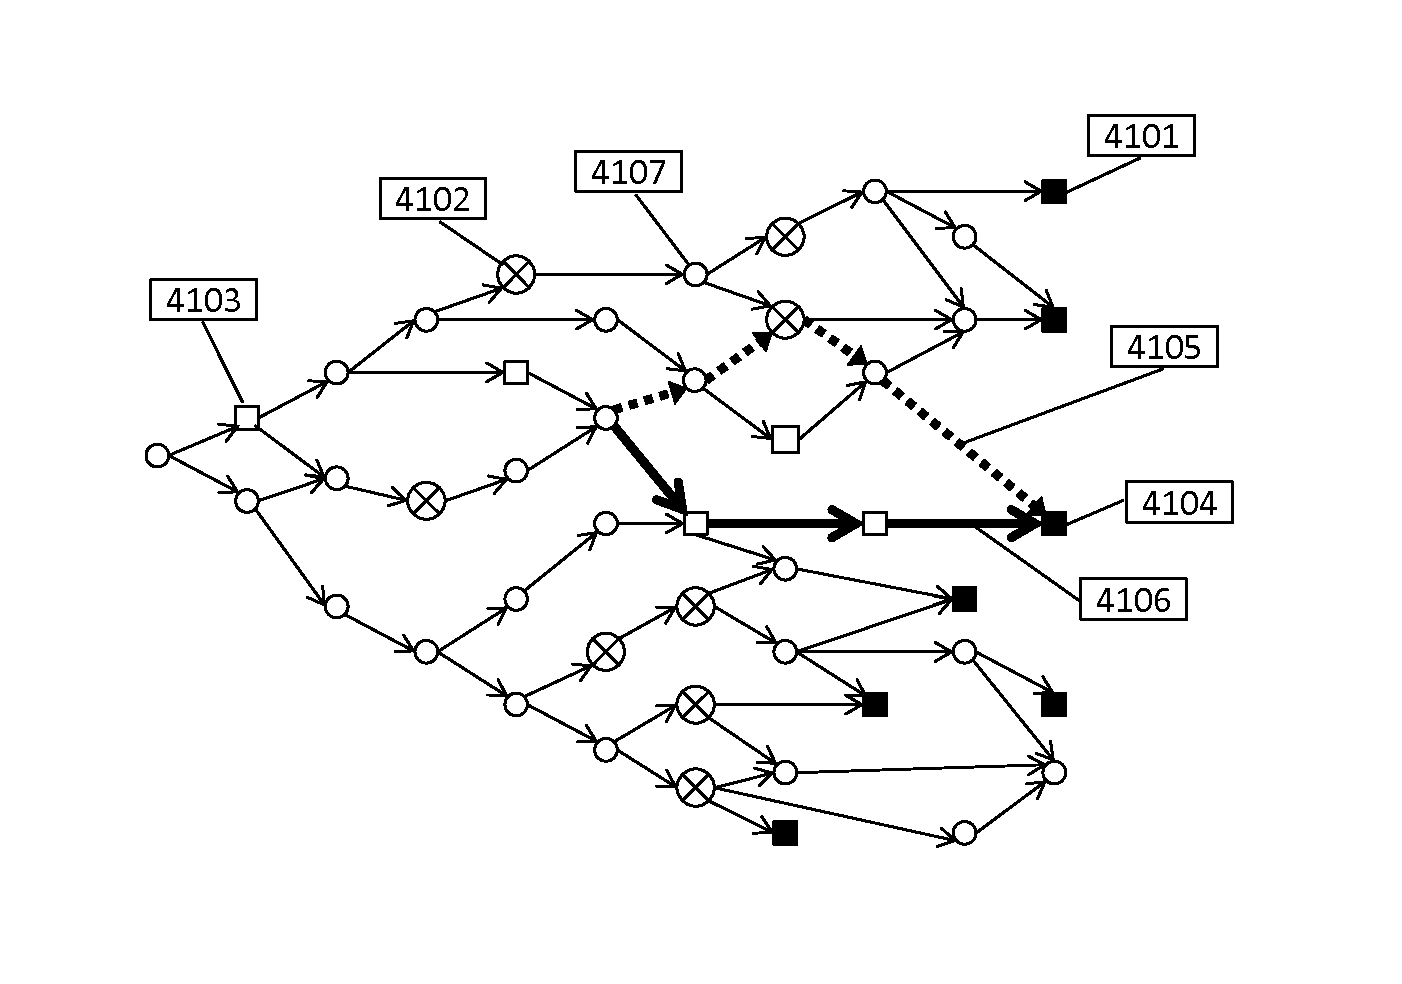 Computerized data-aware agent systems for retrieving data to serve a dialog between human user and computerized system